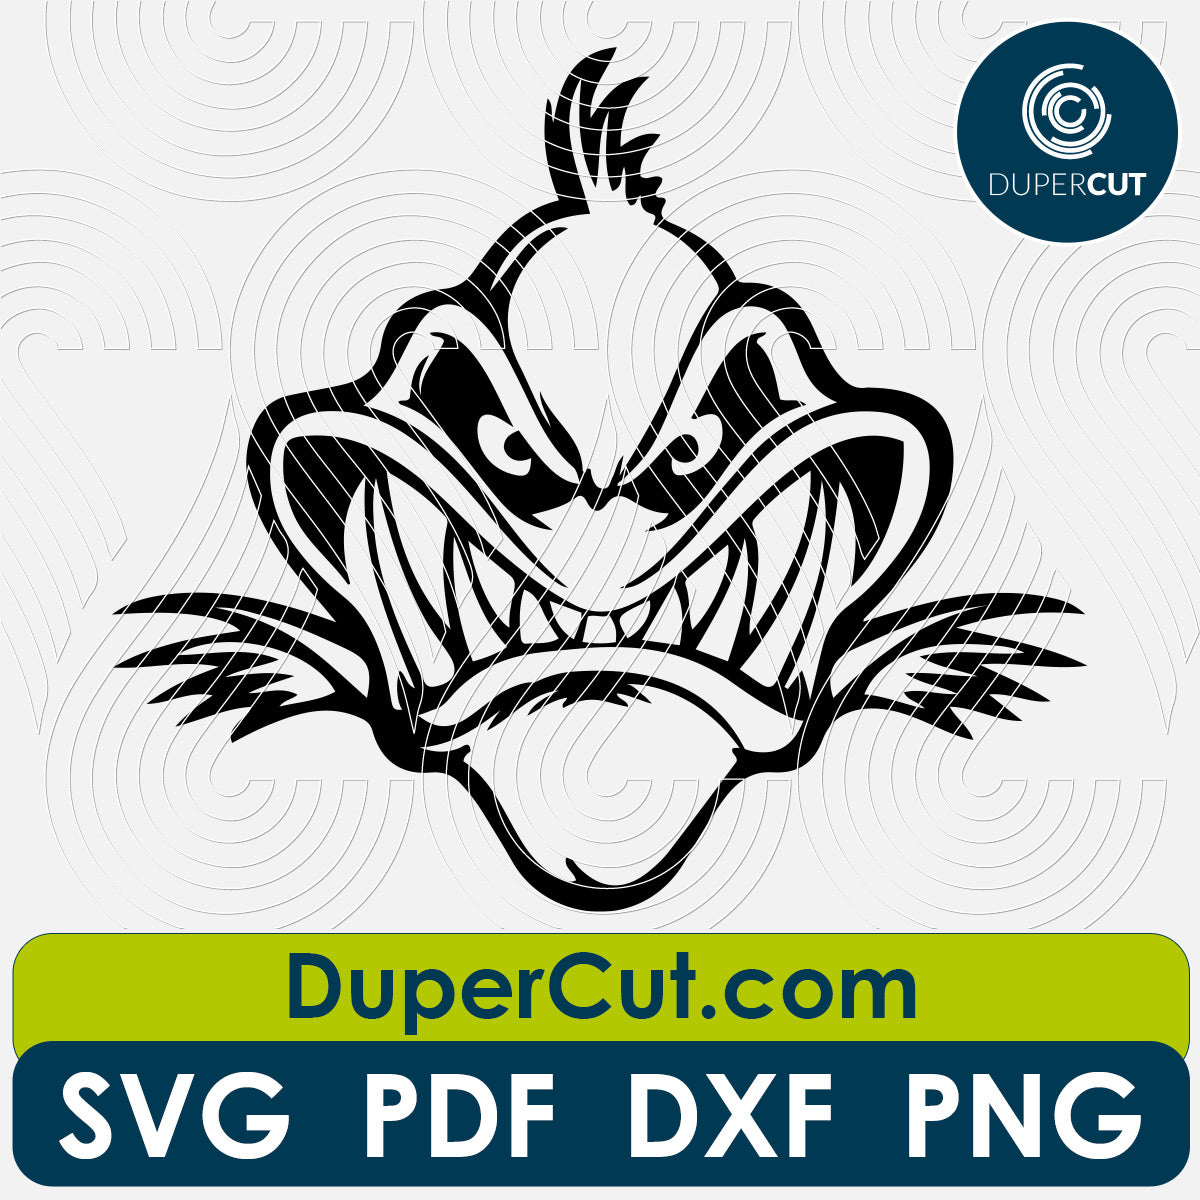 Angry shark front steampunk vector - SVG DXF PNG files - cutting files template for Cricut, Glowforge, Silhouette Cameo, CNC plasma machines by DuperCut.com